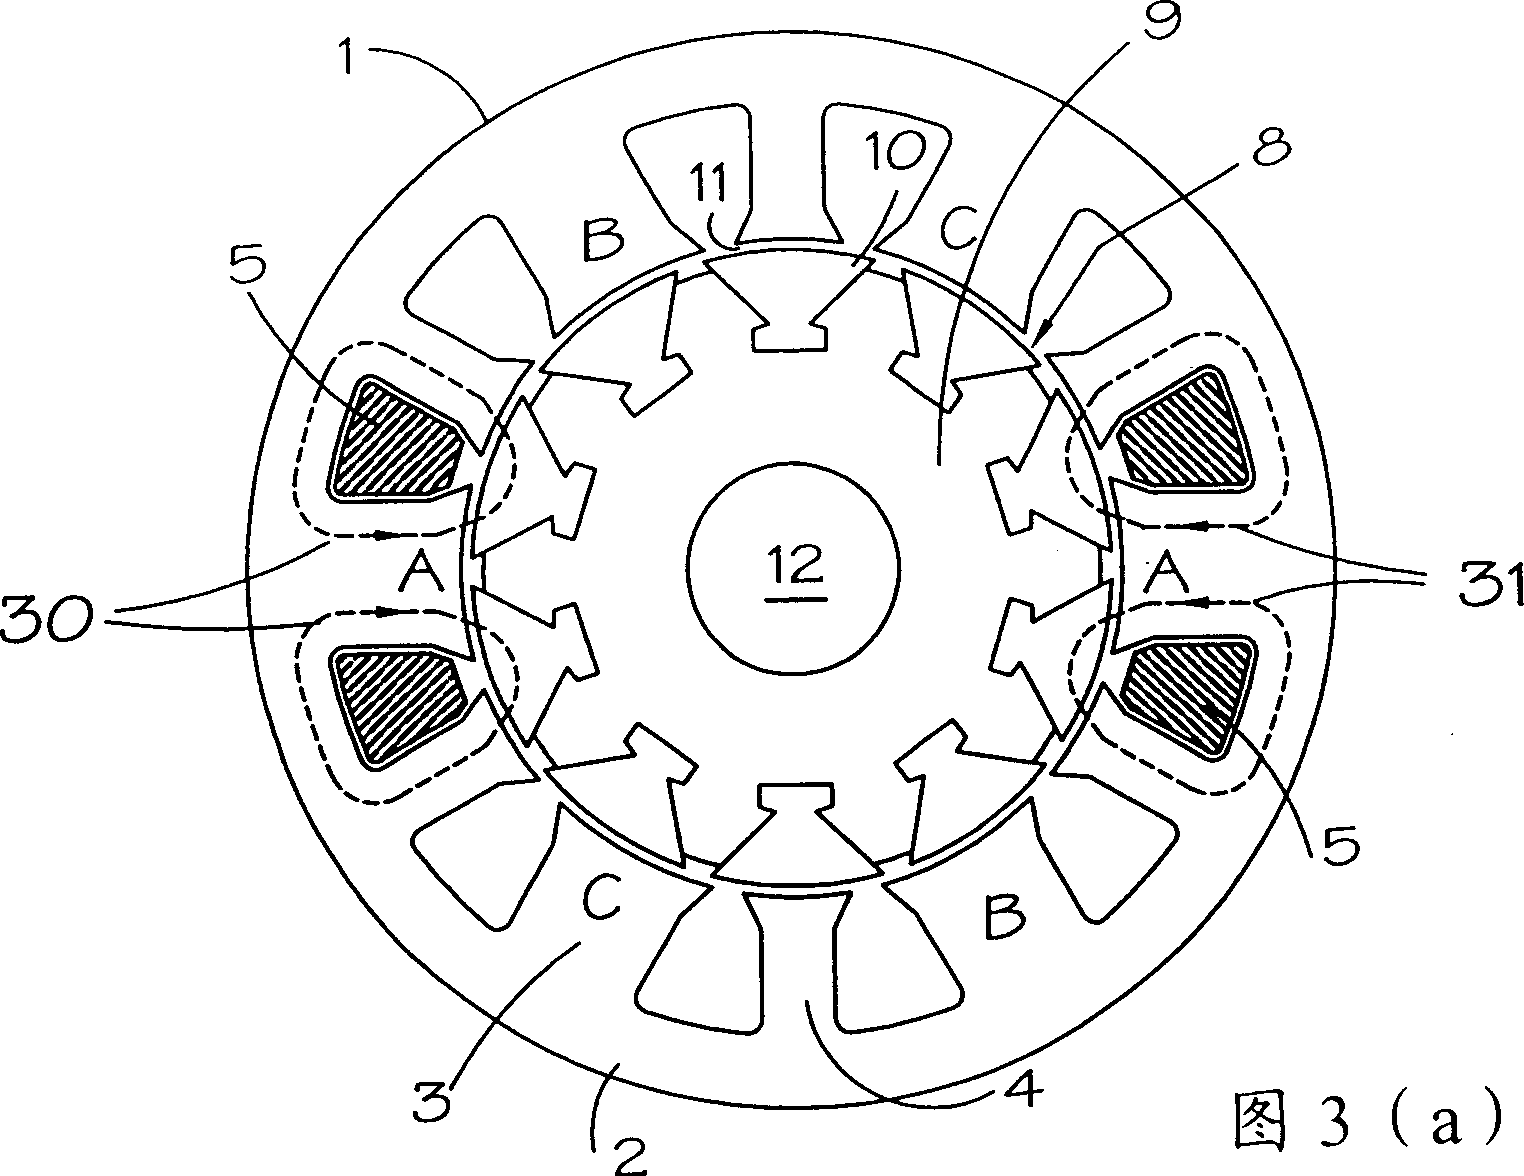 Switch resistance drive device control